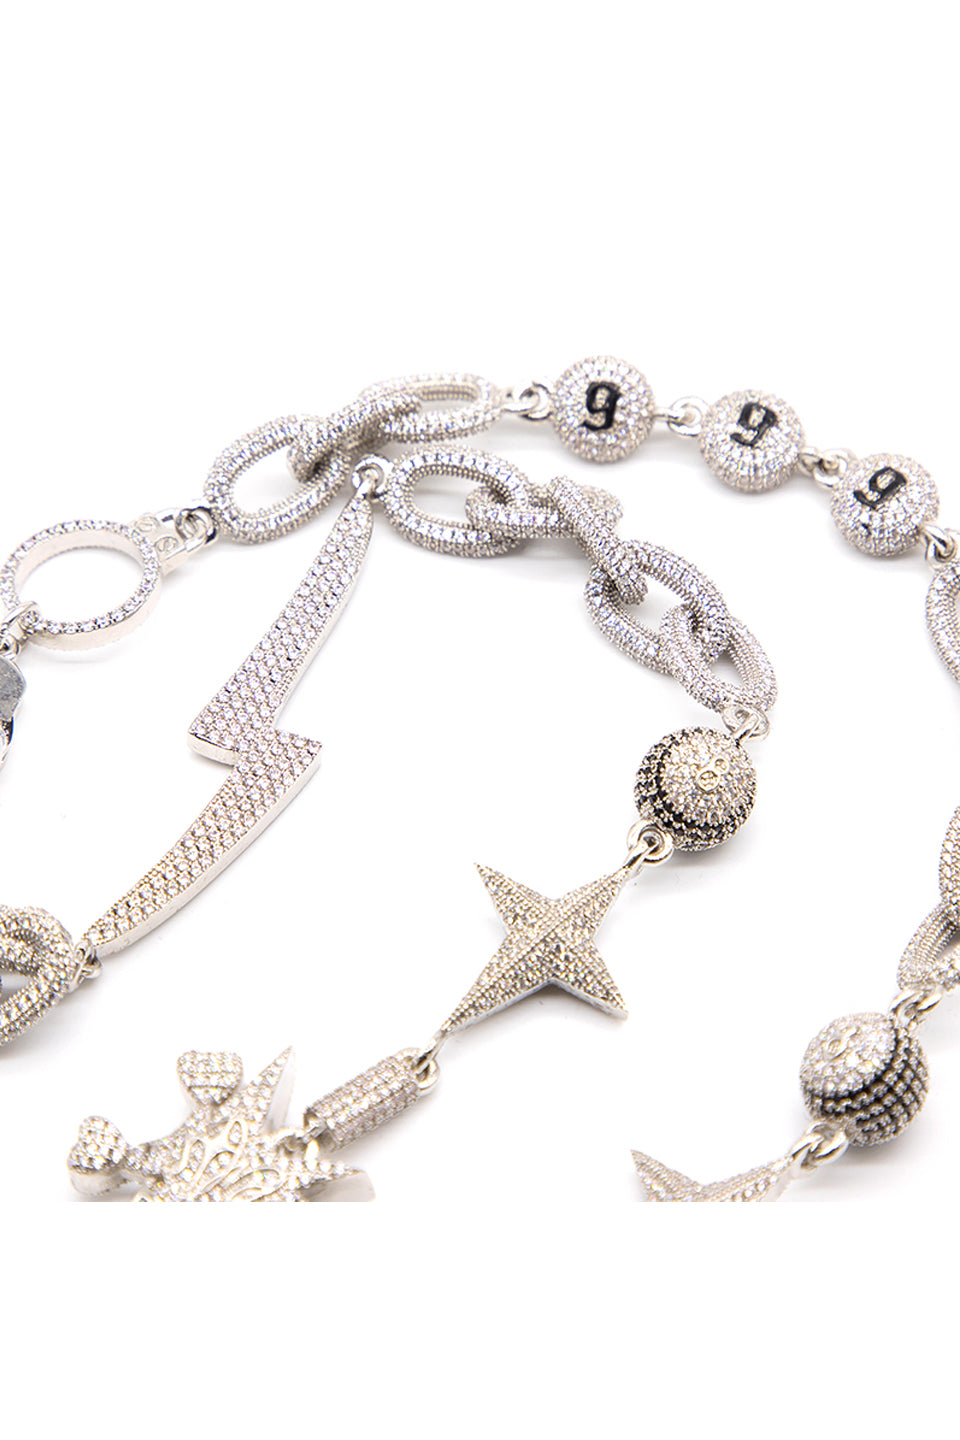 The Lucky Star Chain